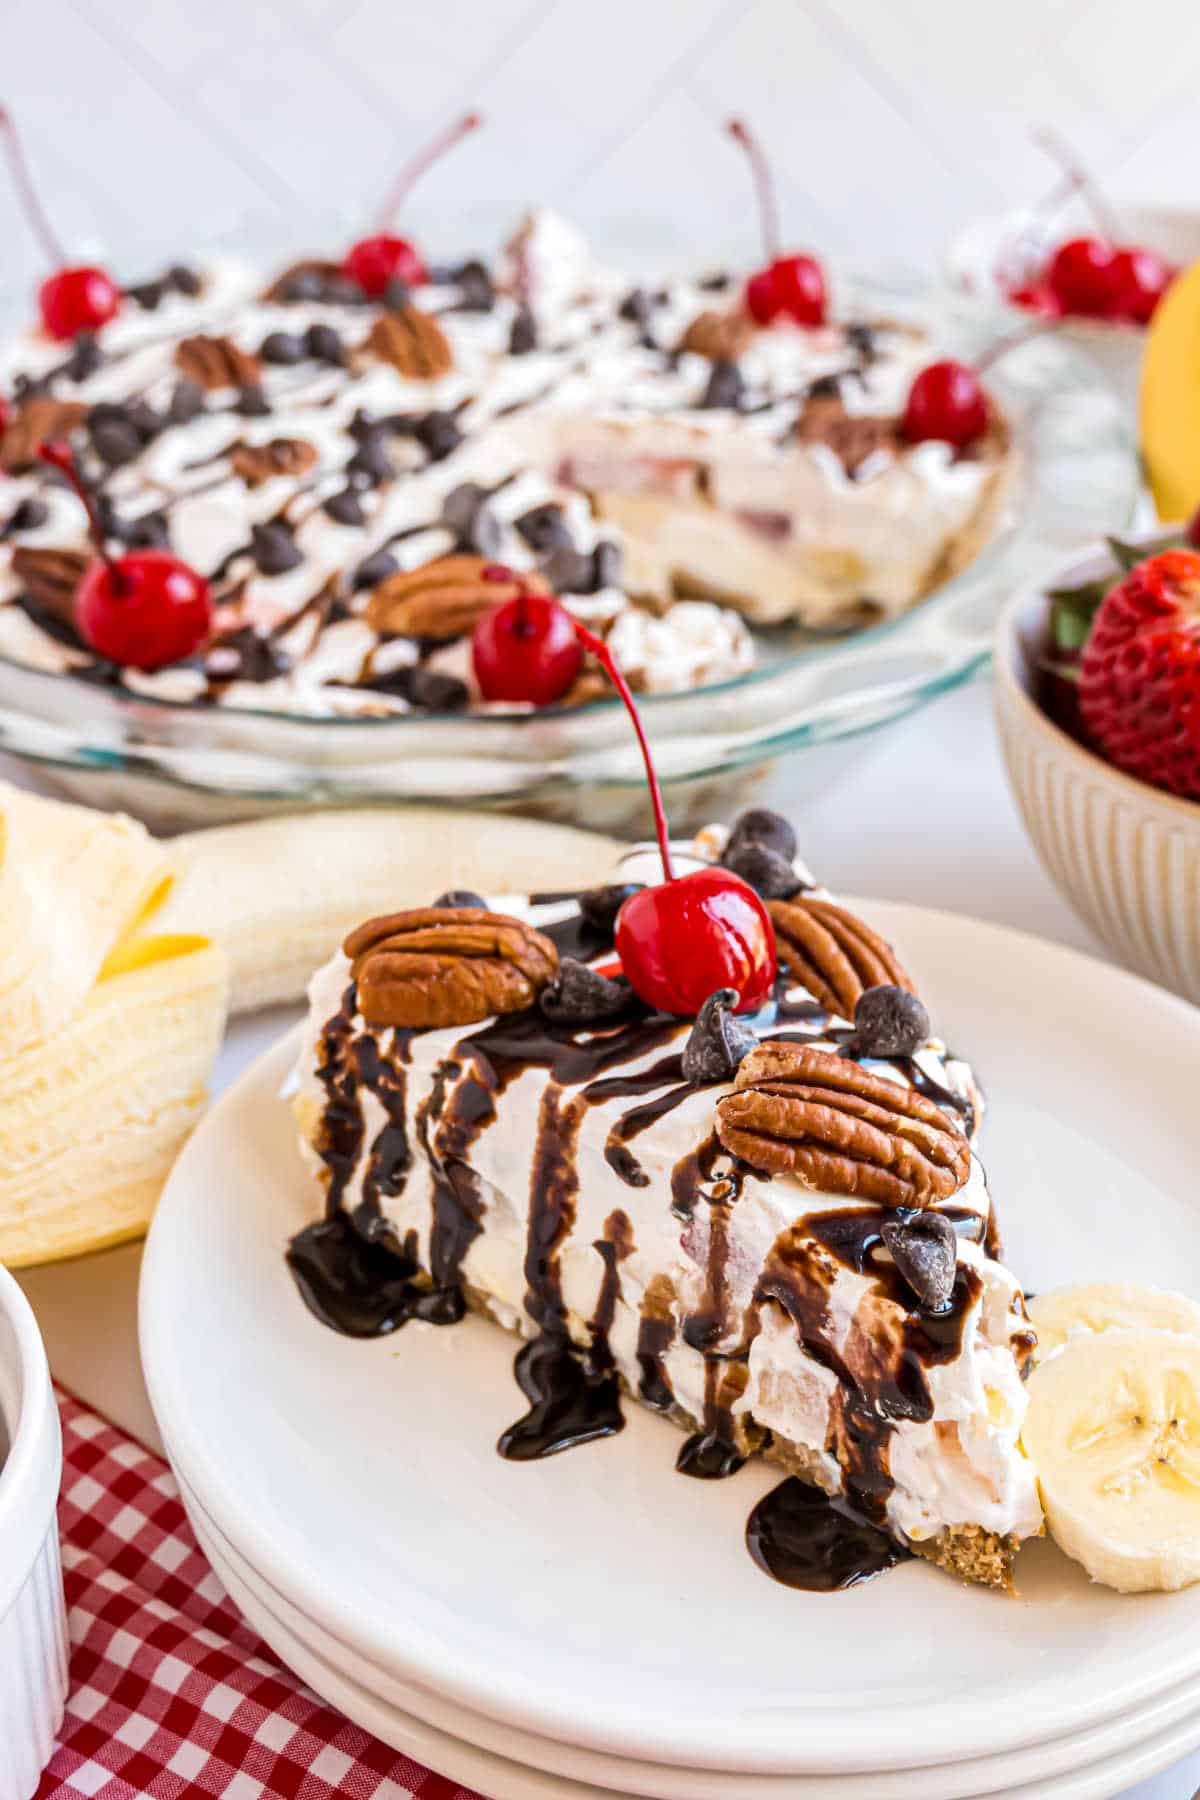 Slice of banana split cheesecake with chocolate syrup on a white dessert plate.